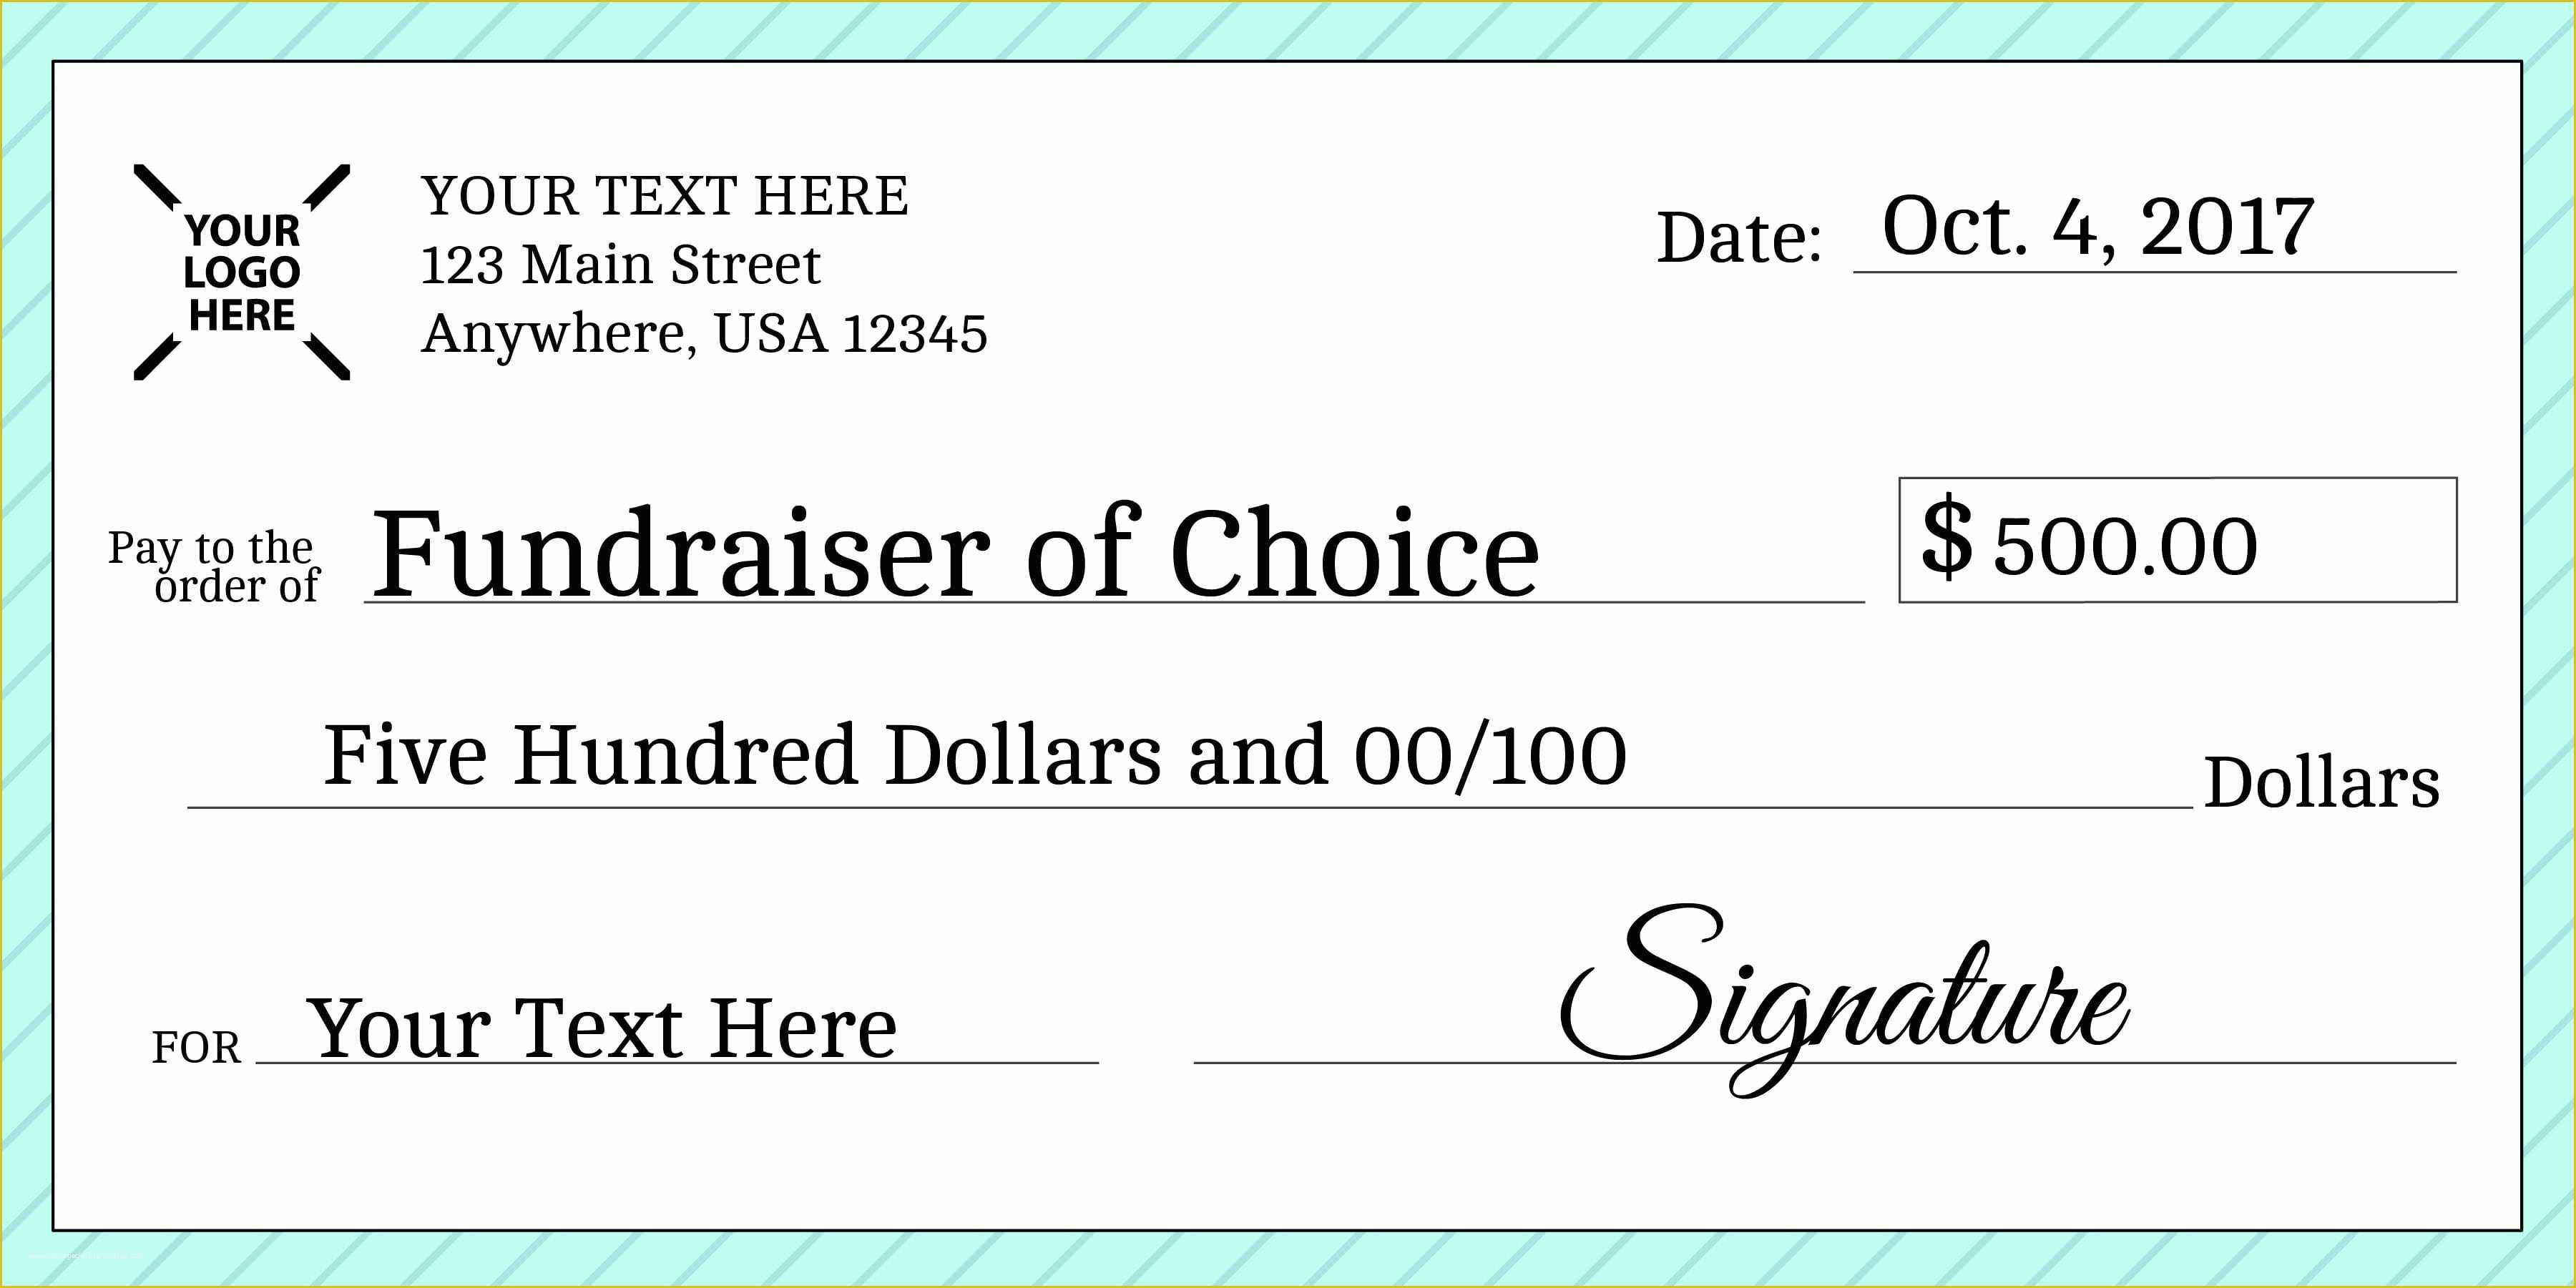 Oversized Check Template Free Of Five Hundred Dollars Check Best S About Dollar